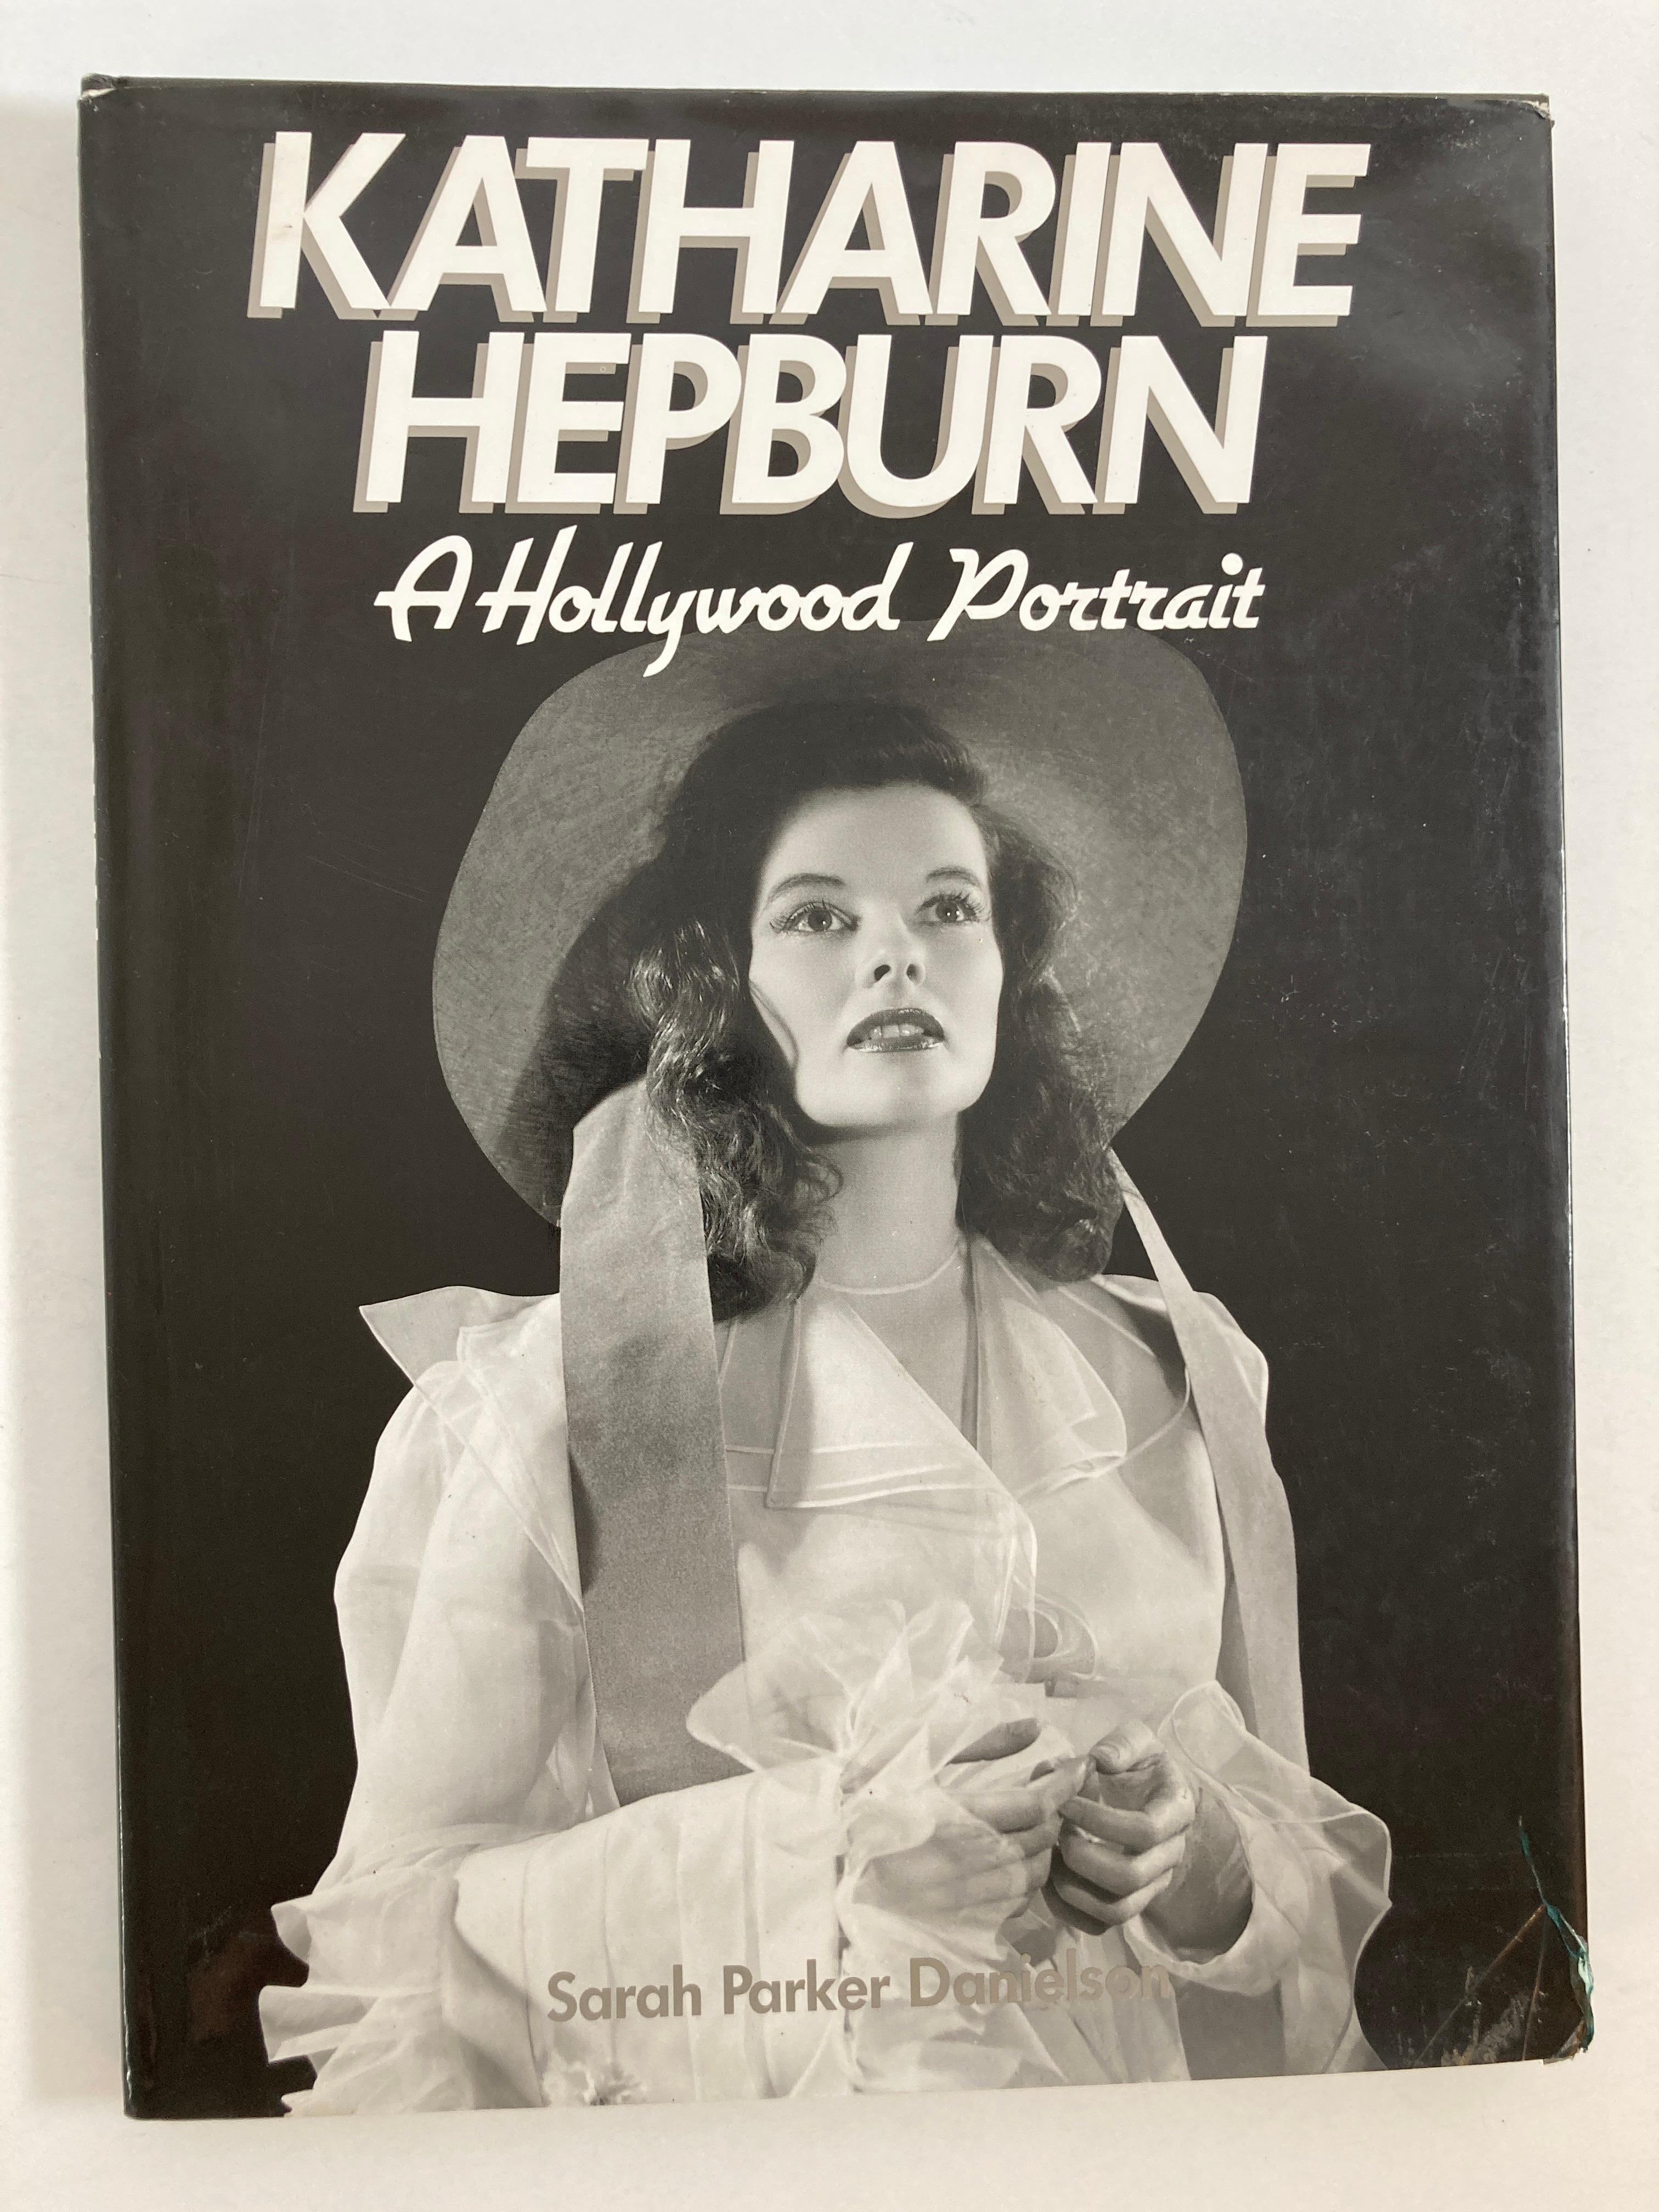 New York, New York, U.S.A.: Smithmark Publishers, 1993. Published 1993. Collection of still photos from Hepburn's better- and lesser-known movies, with accompanying text. Black hardcover, 112 pages, illustrated dustjacket. 
The book has some